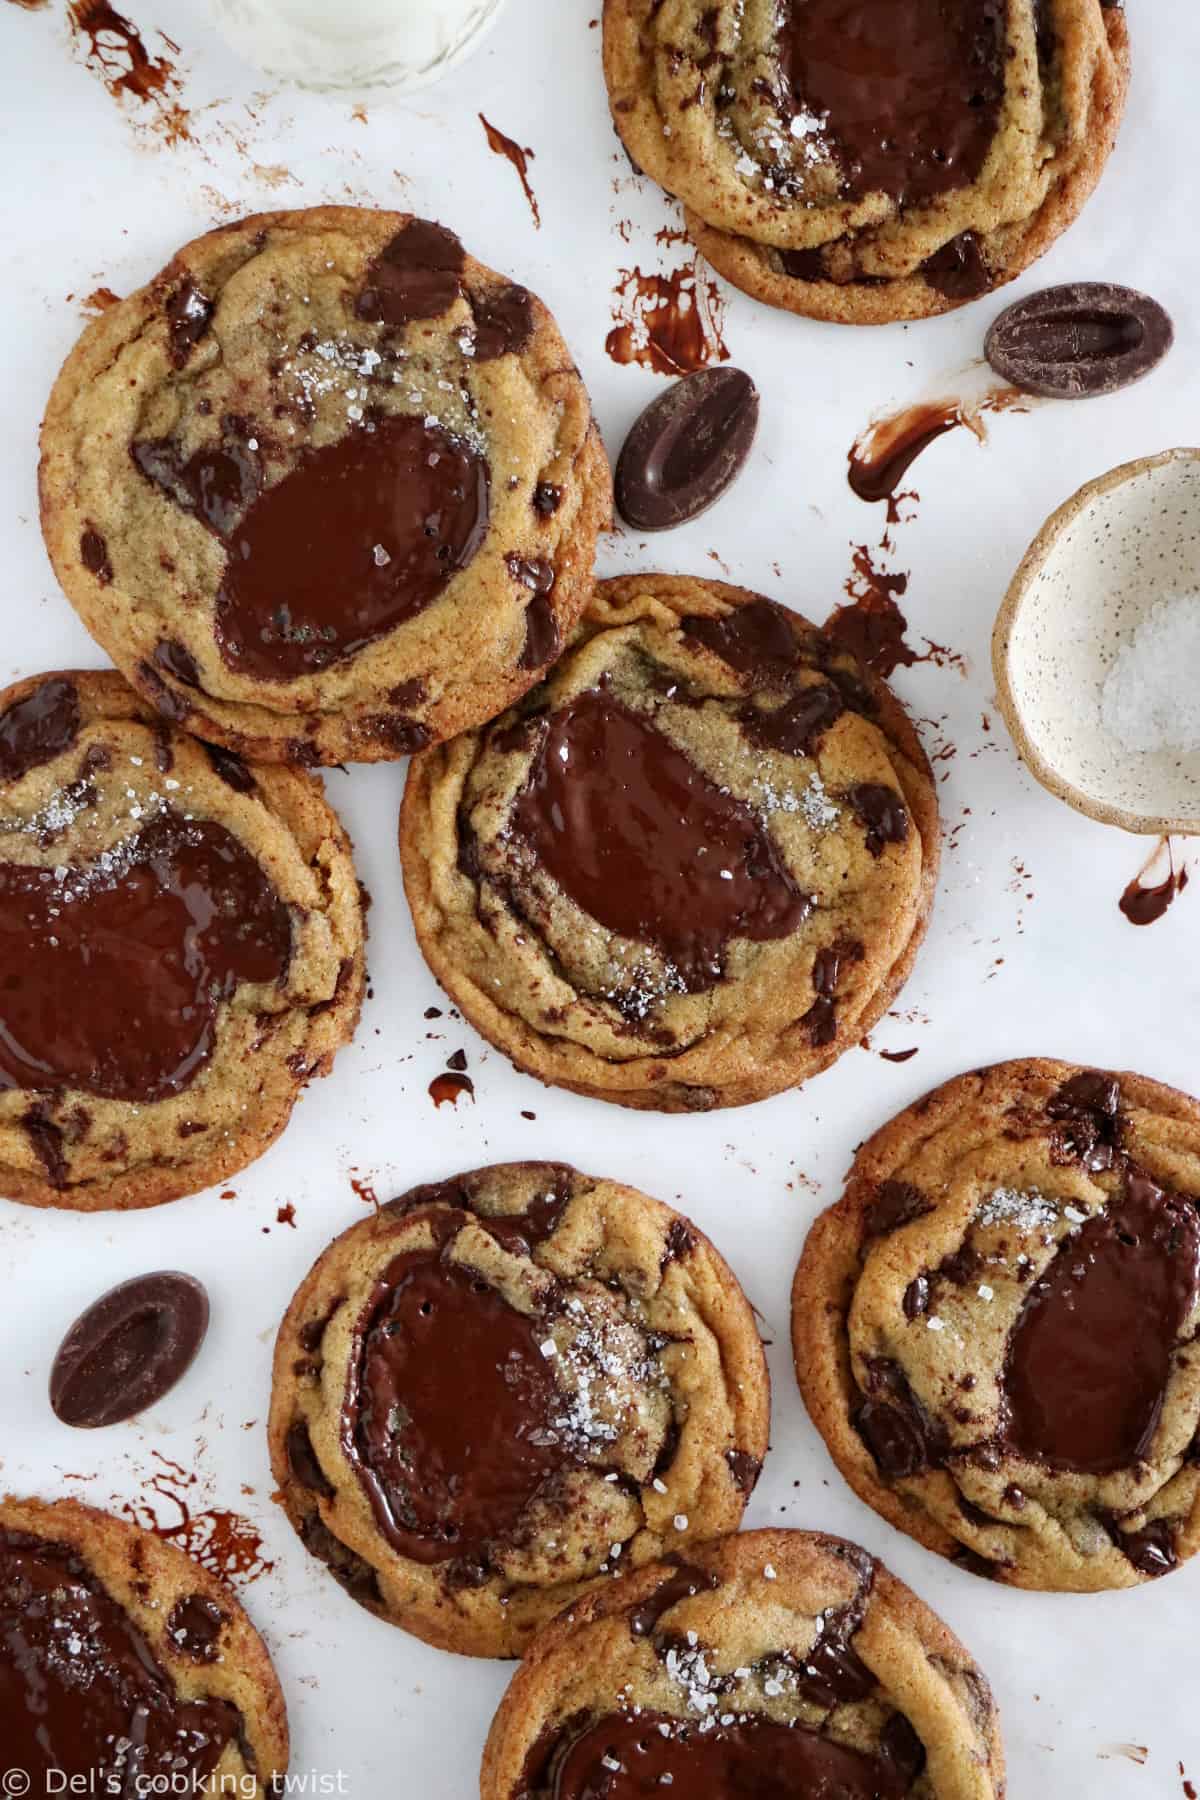 The Ultimate Guide to Baking Cookies: Convection vs Conventional Ovens